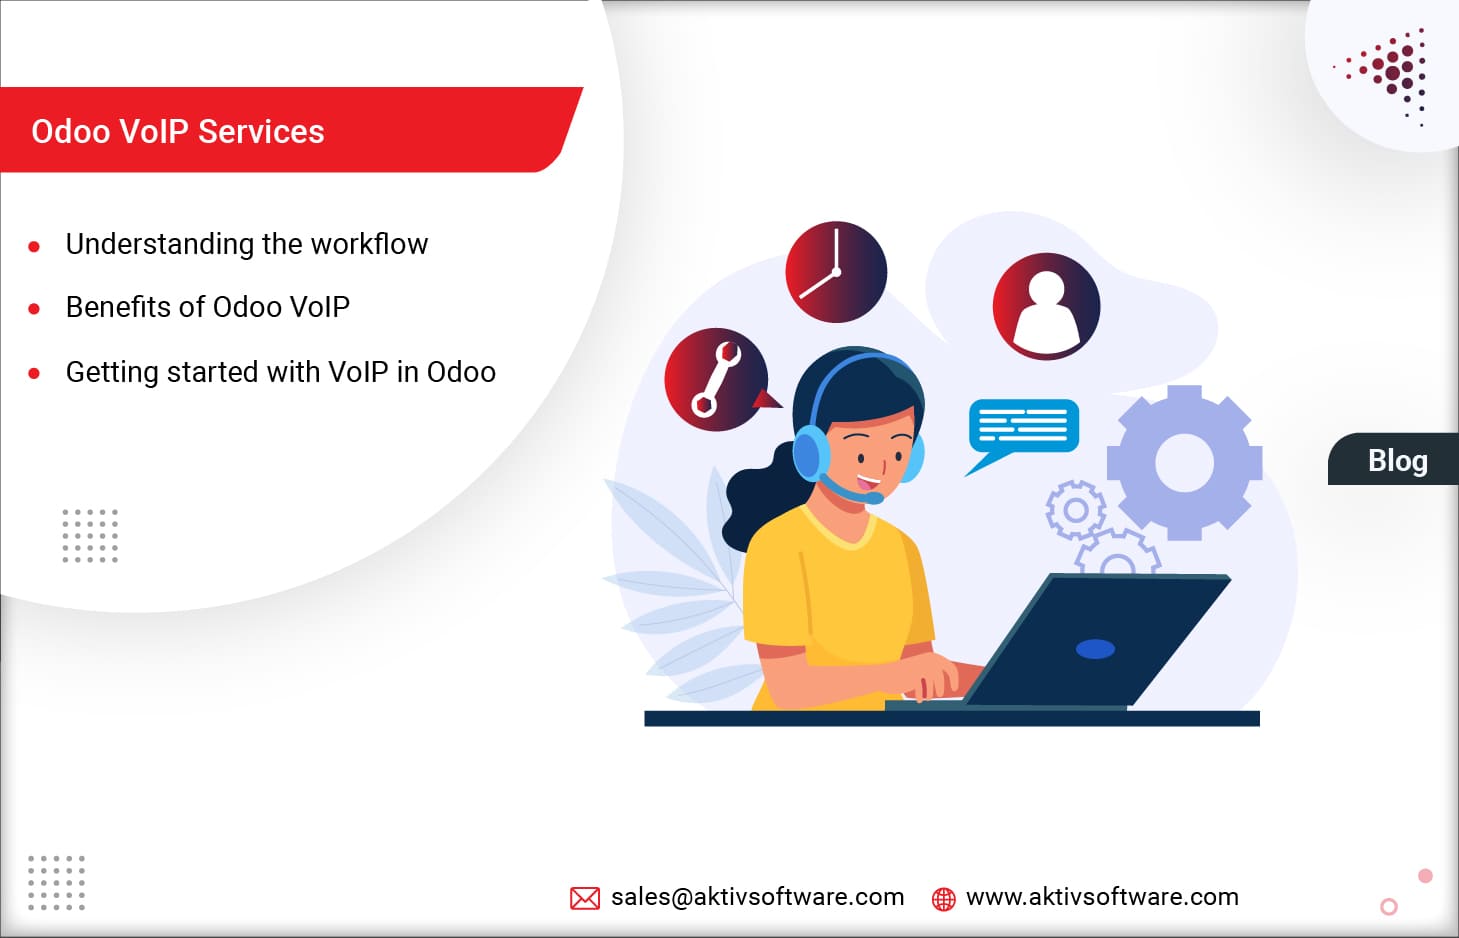 Odoo VoIP Services